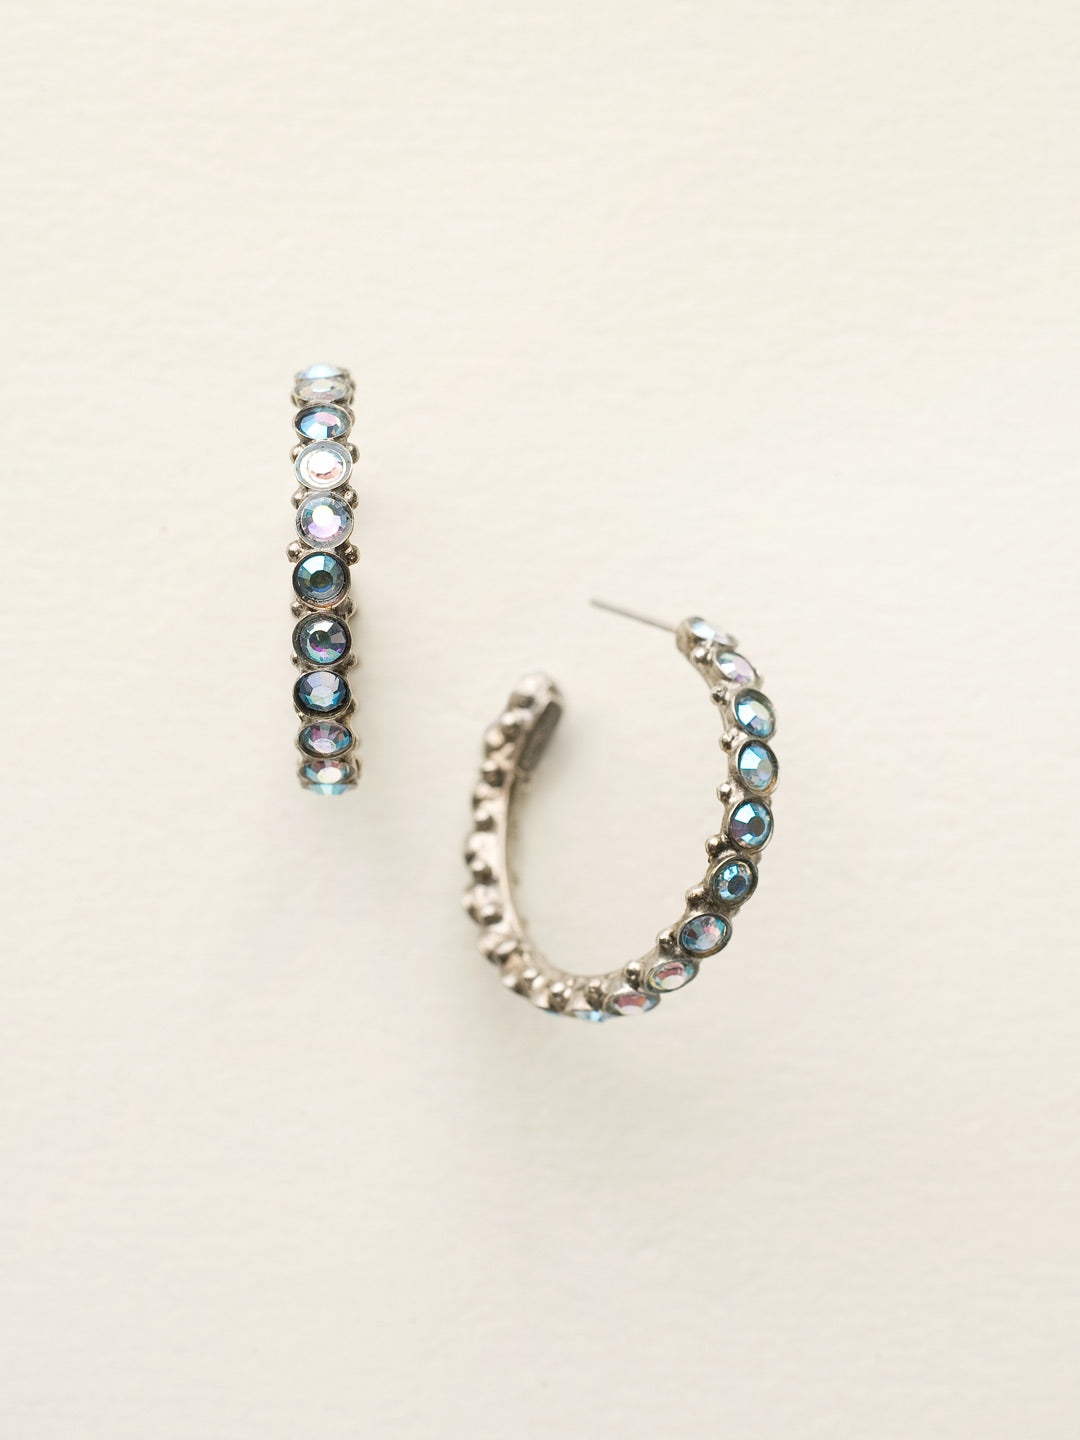 Heavenly Hoop Earrings - ECQ24ASIB - <p>Gemstones cover the outside of these hoop earrings. Their simple style combined with the sparkle of the jewels makes it the perfect staple piece for your jewelry box. From Sorrelli's Ice Blue collection in our Antique Silver-tone finish.</p>